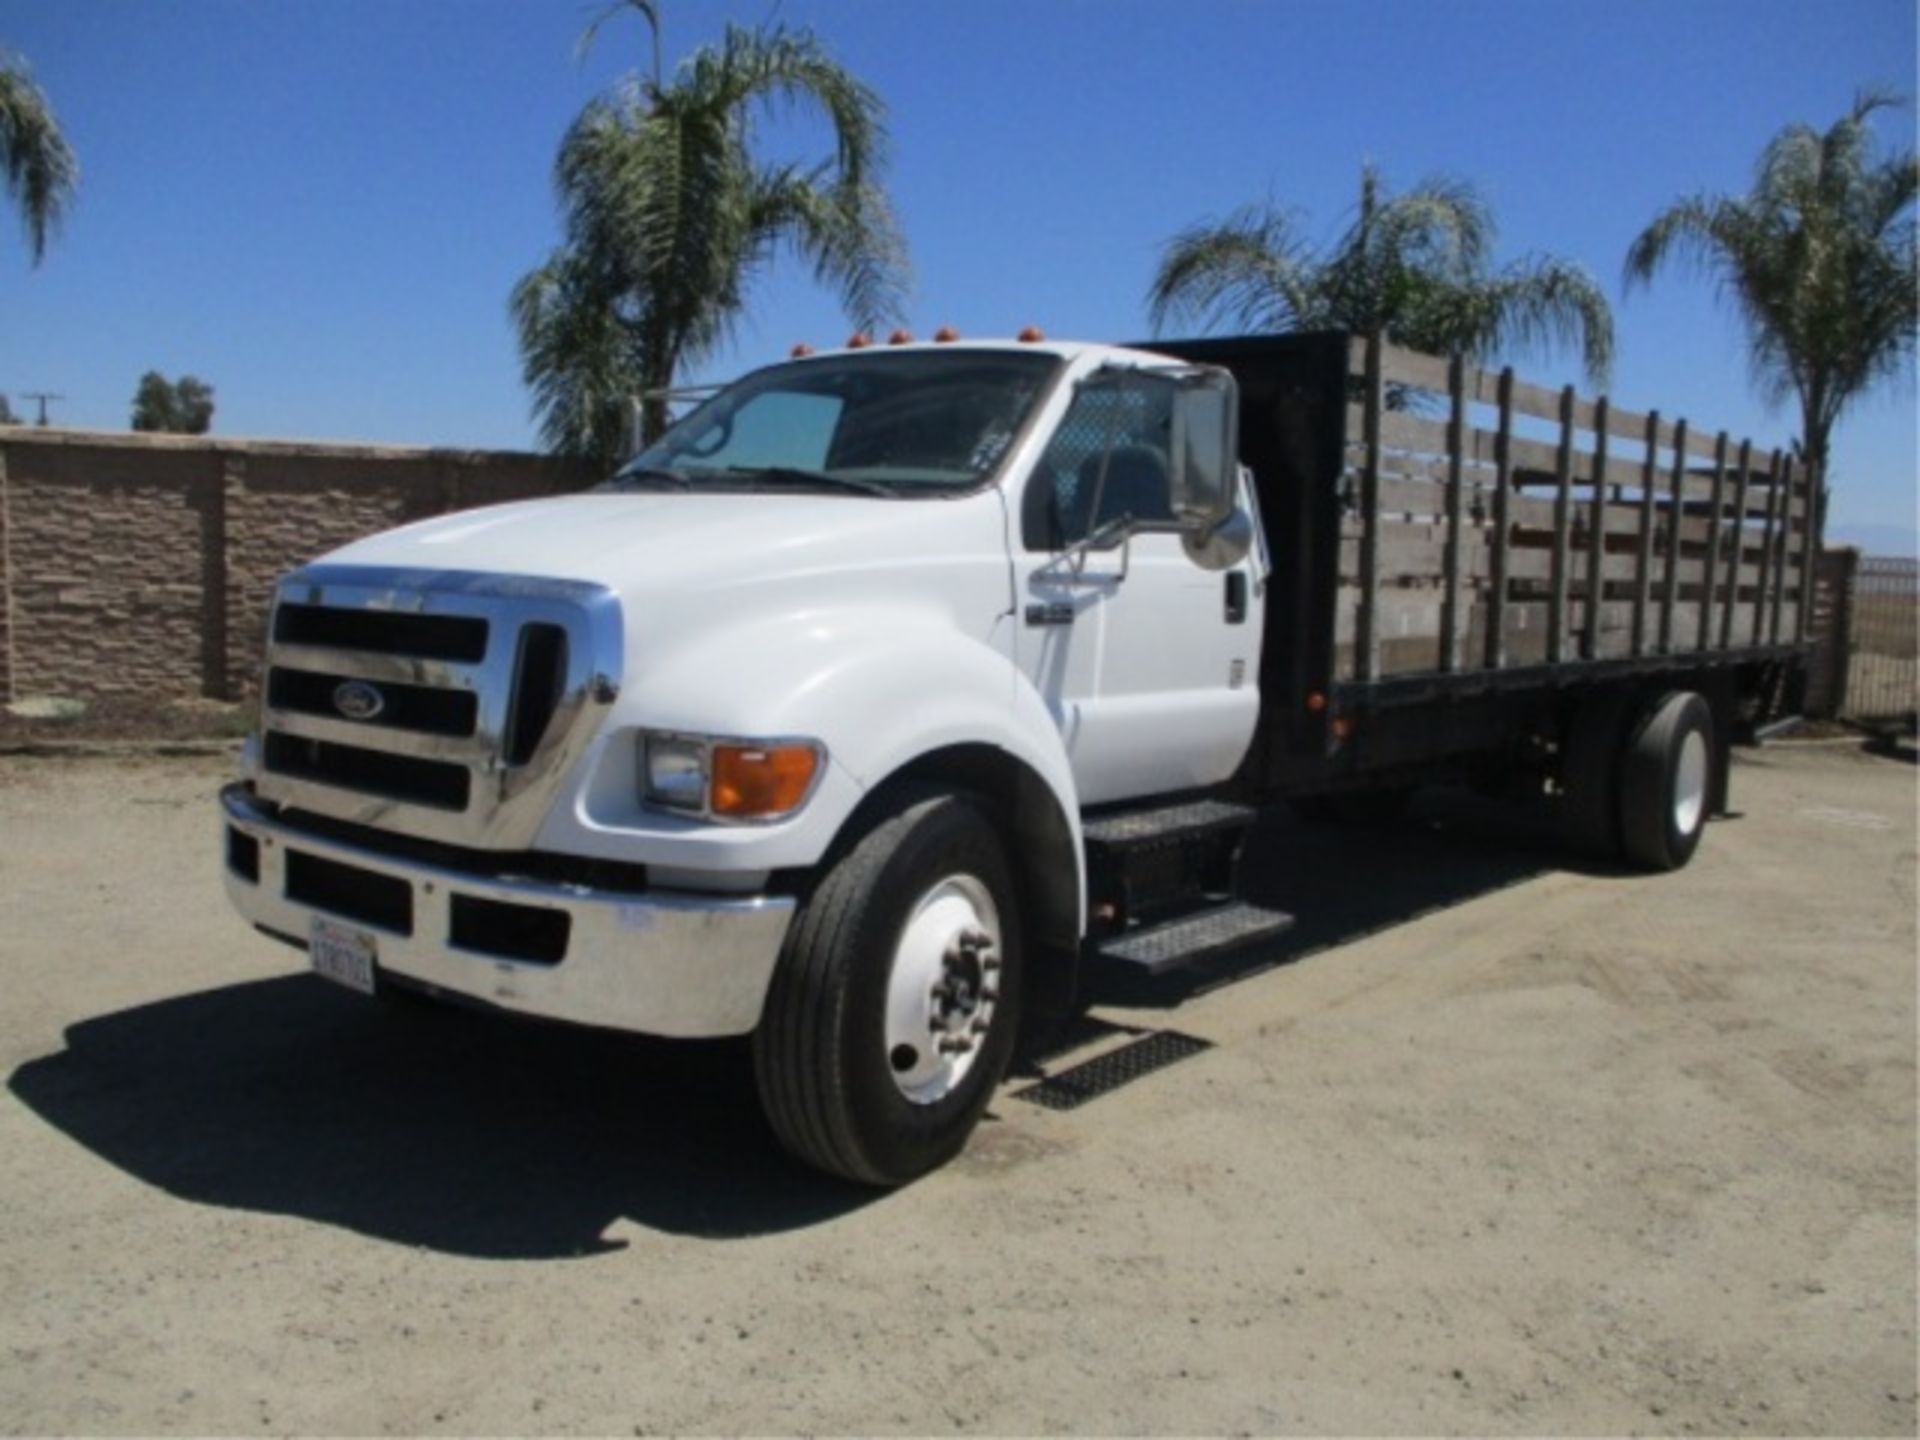 2005 Ford F650 S/A Flatbed Stakebed Truck, Cat C7 Acert 7.2L 6-Cyl Diesel, Automatic, Lift Gate, 24' - Image 2 of 61